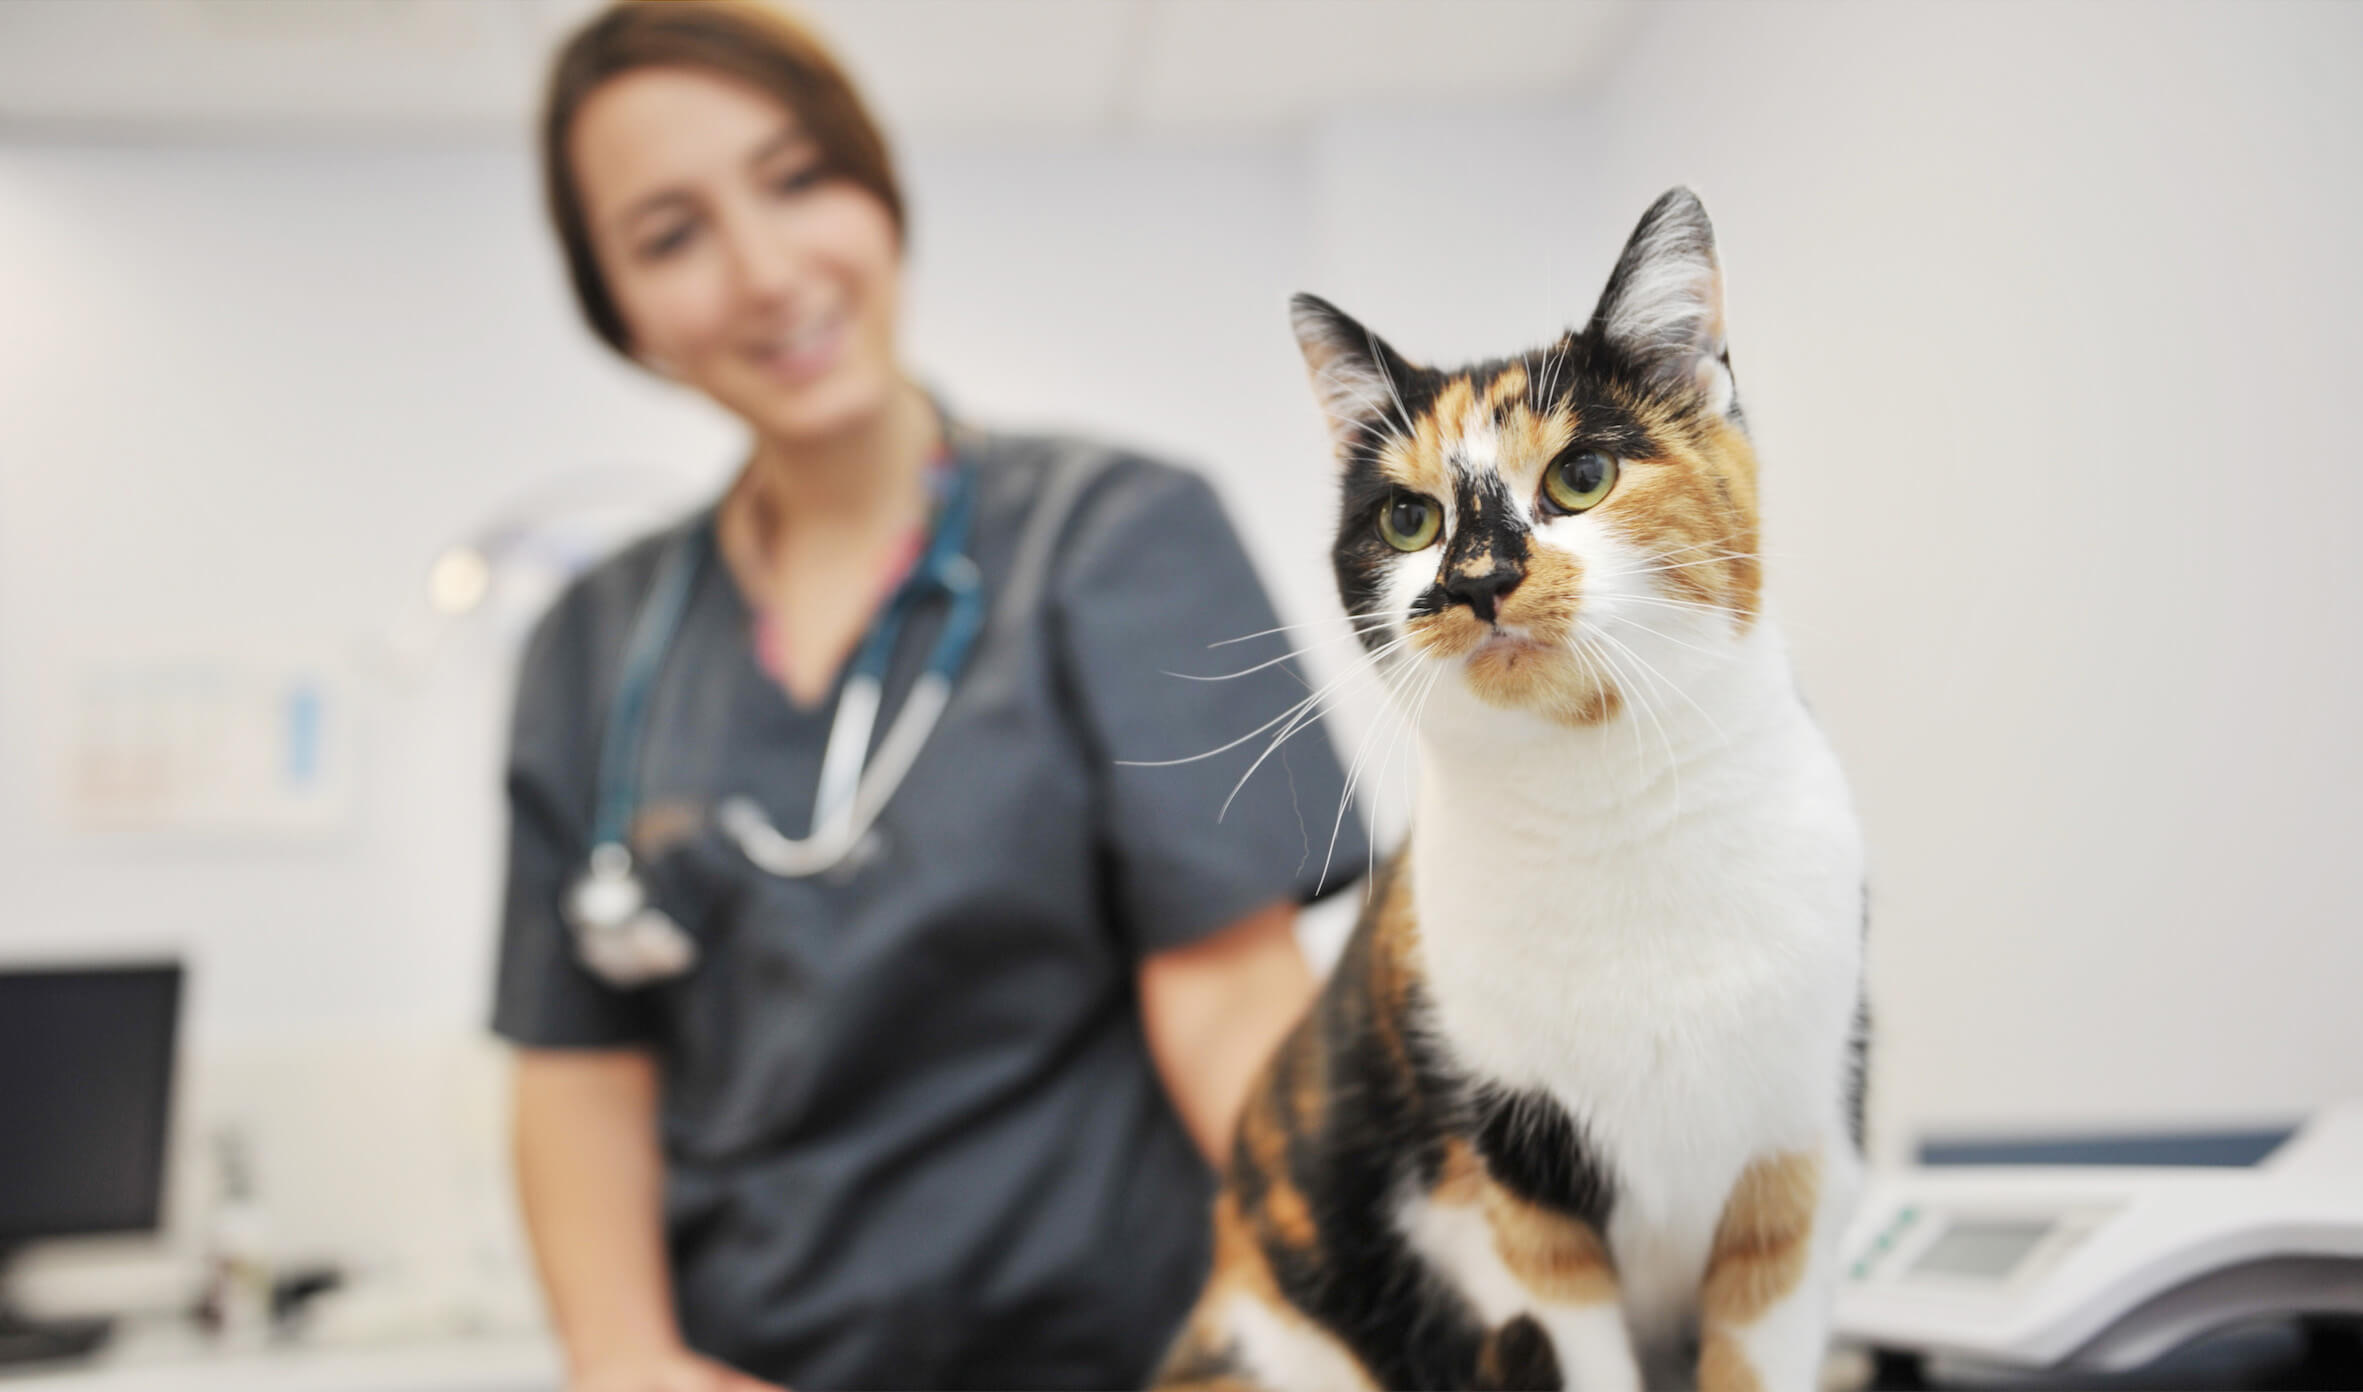 We are one of the largest & most advanced veterinary specialist referral centres in the UK.